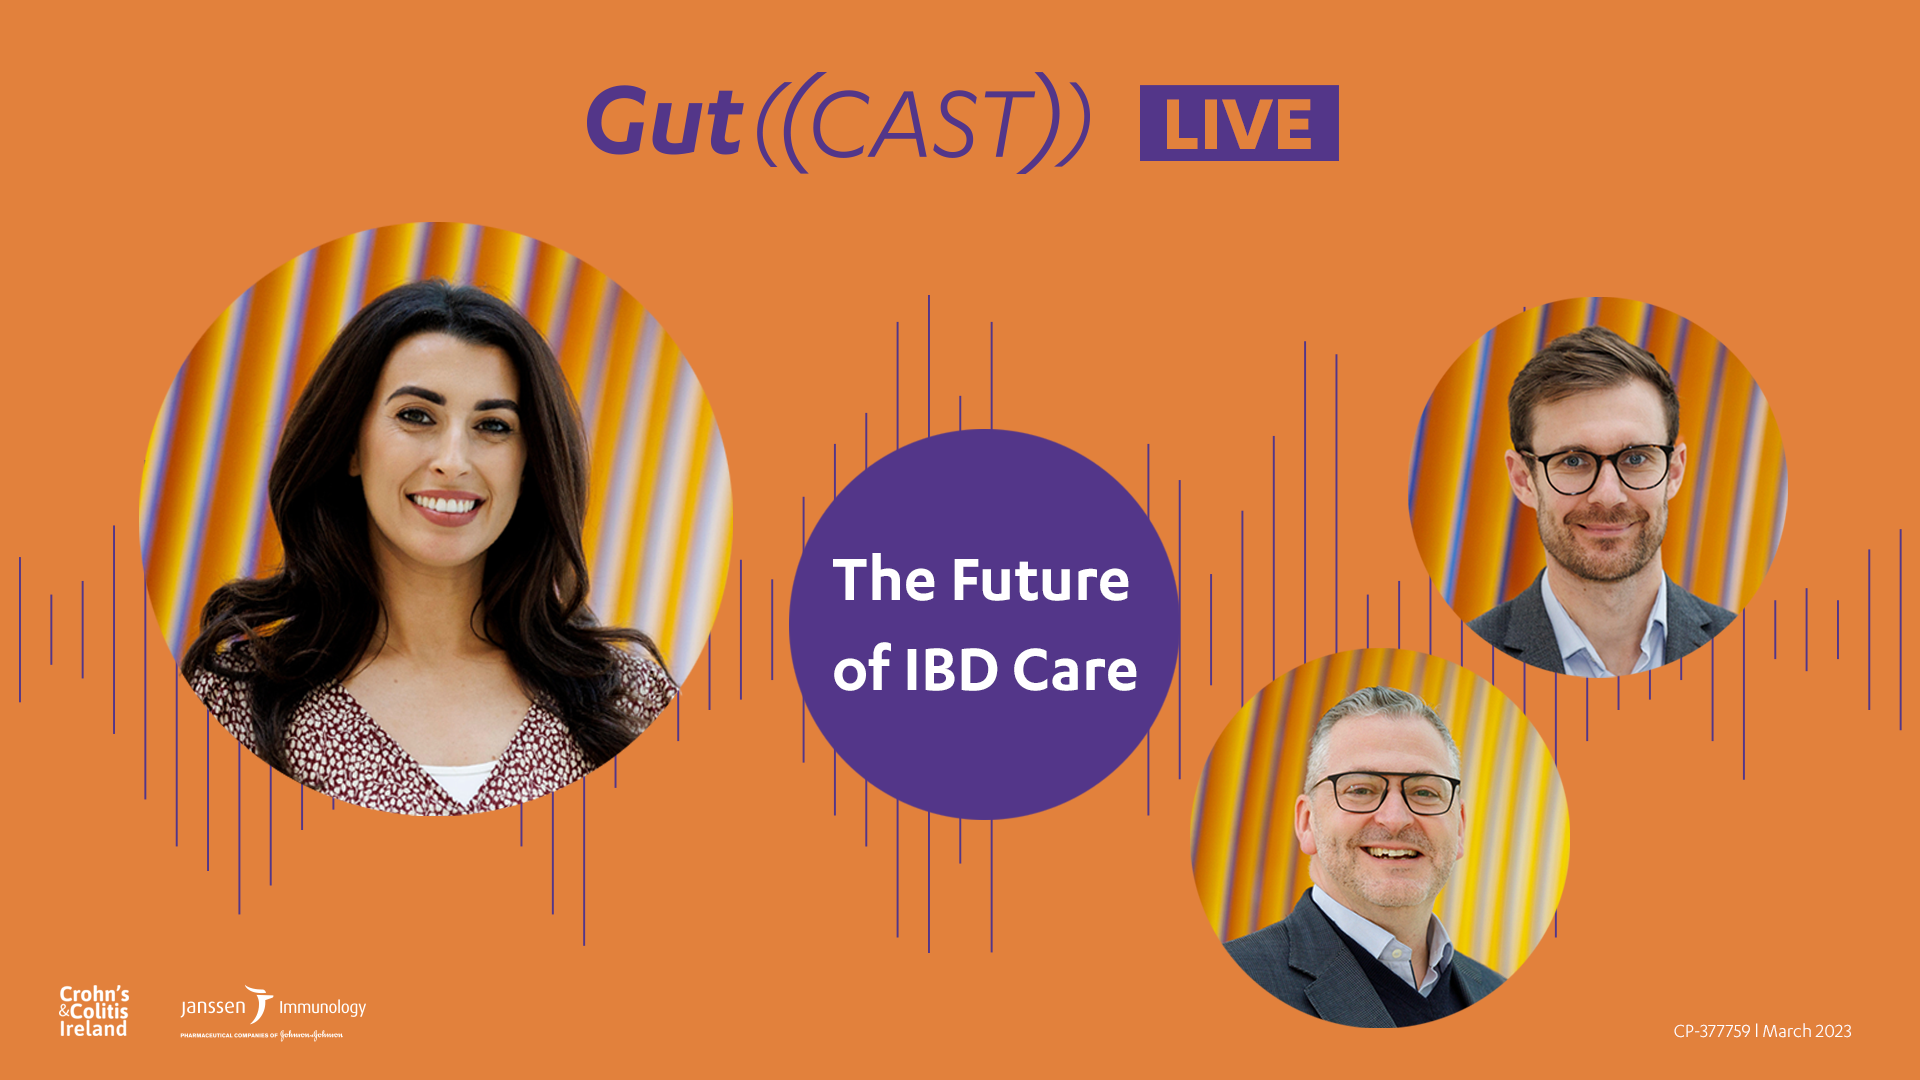 The bonus episode of the podcast series Gutcast, named "The future of IBD Care".